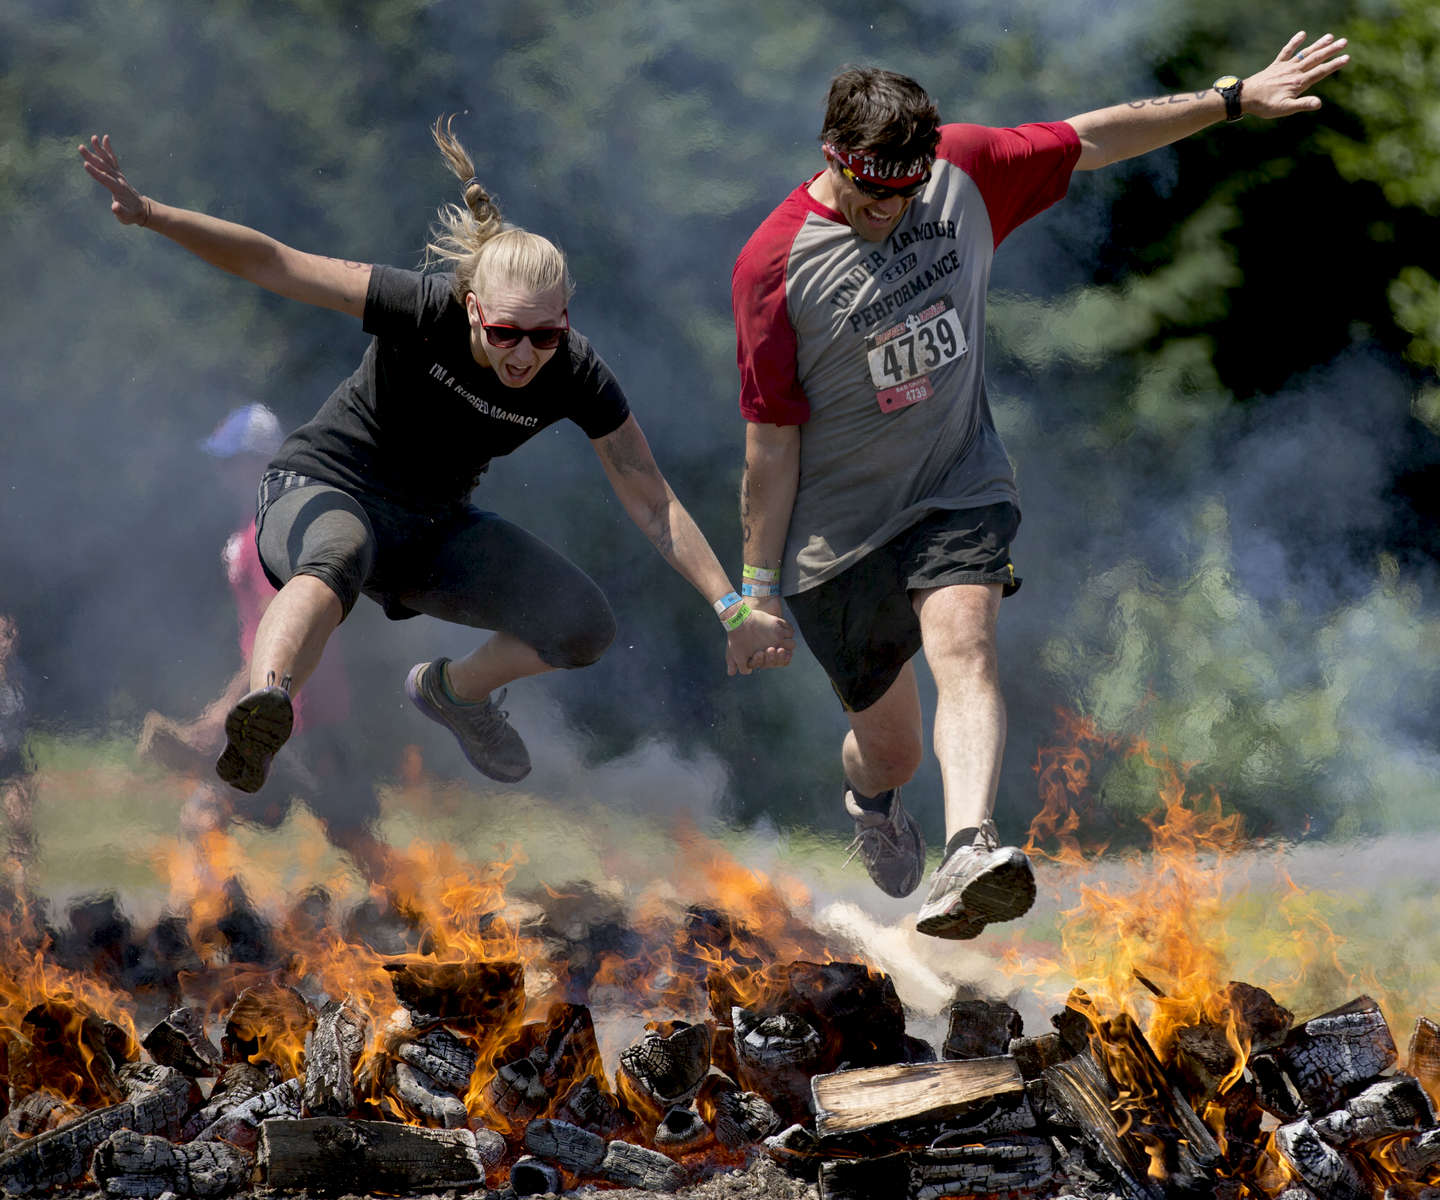 The Pyromaniac obstacle, one of 25 challenging events in the Rugged Maniac race in Portland.